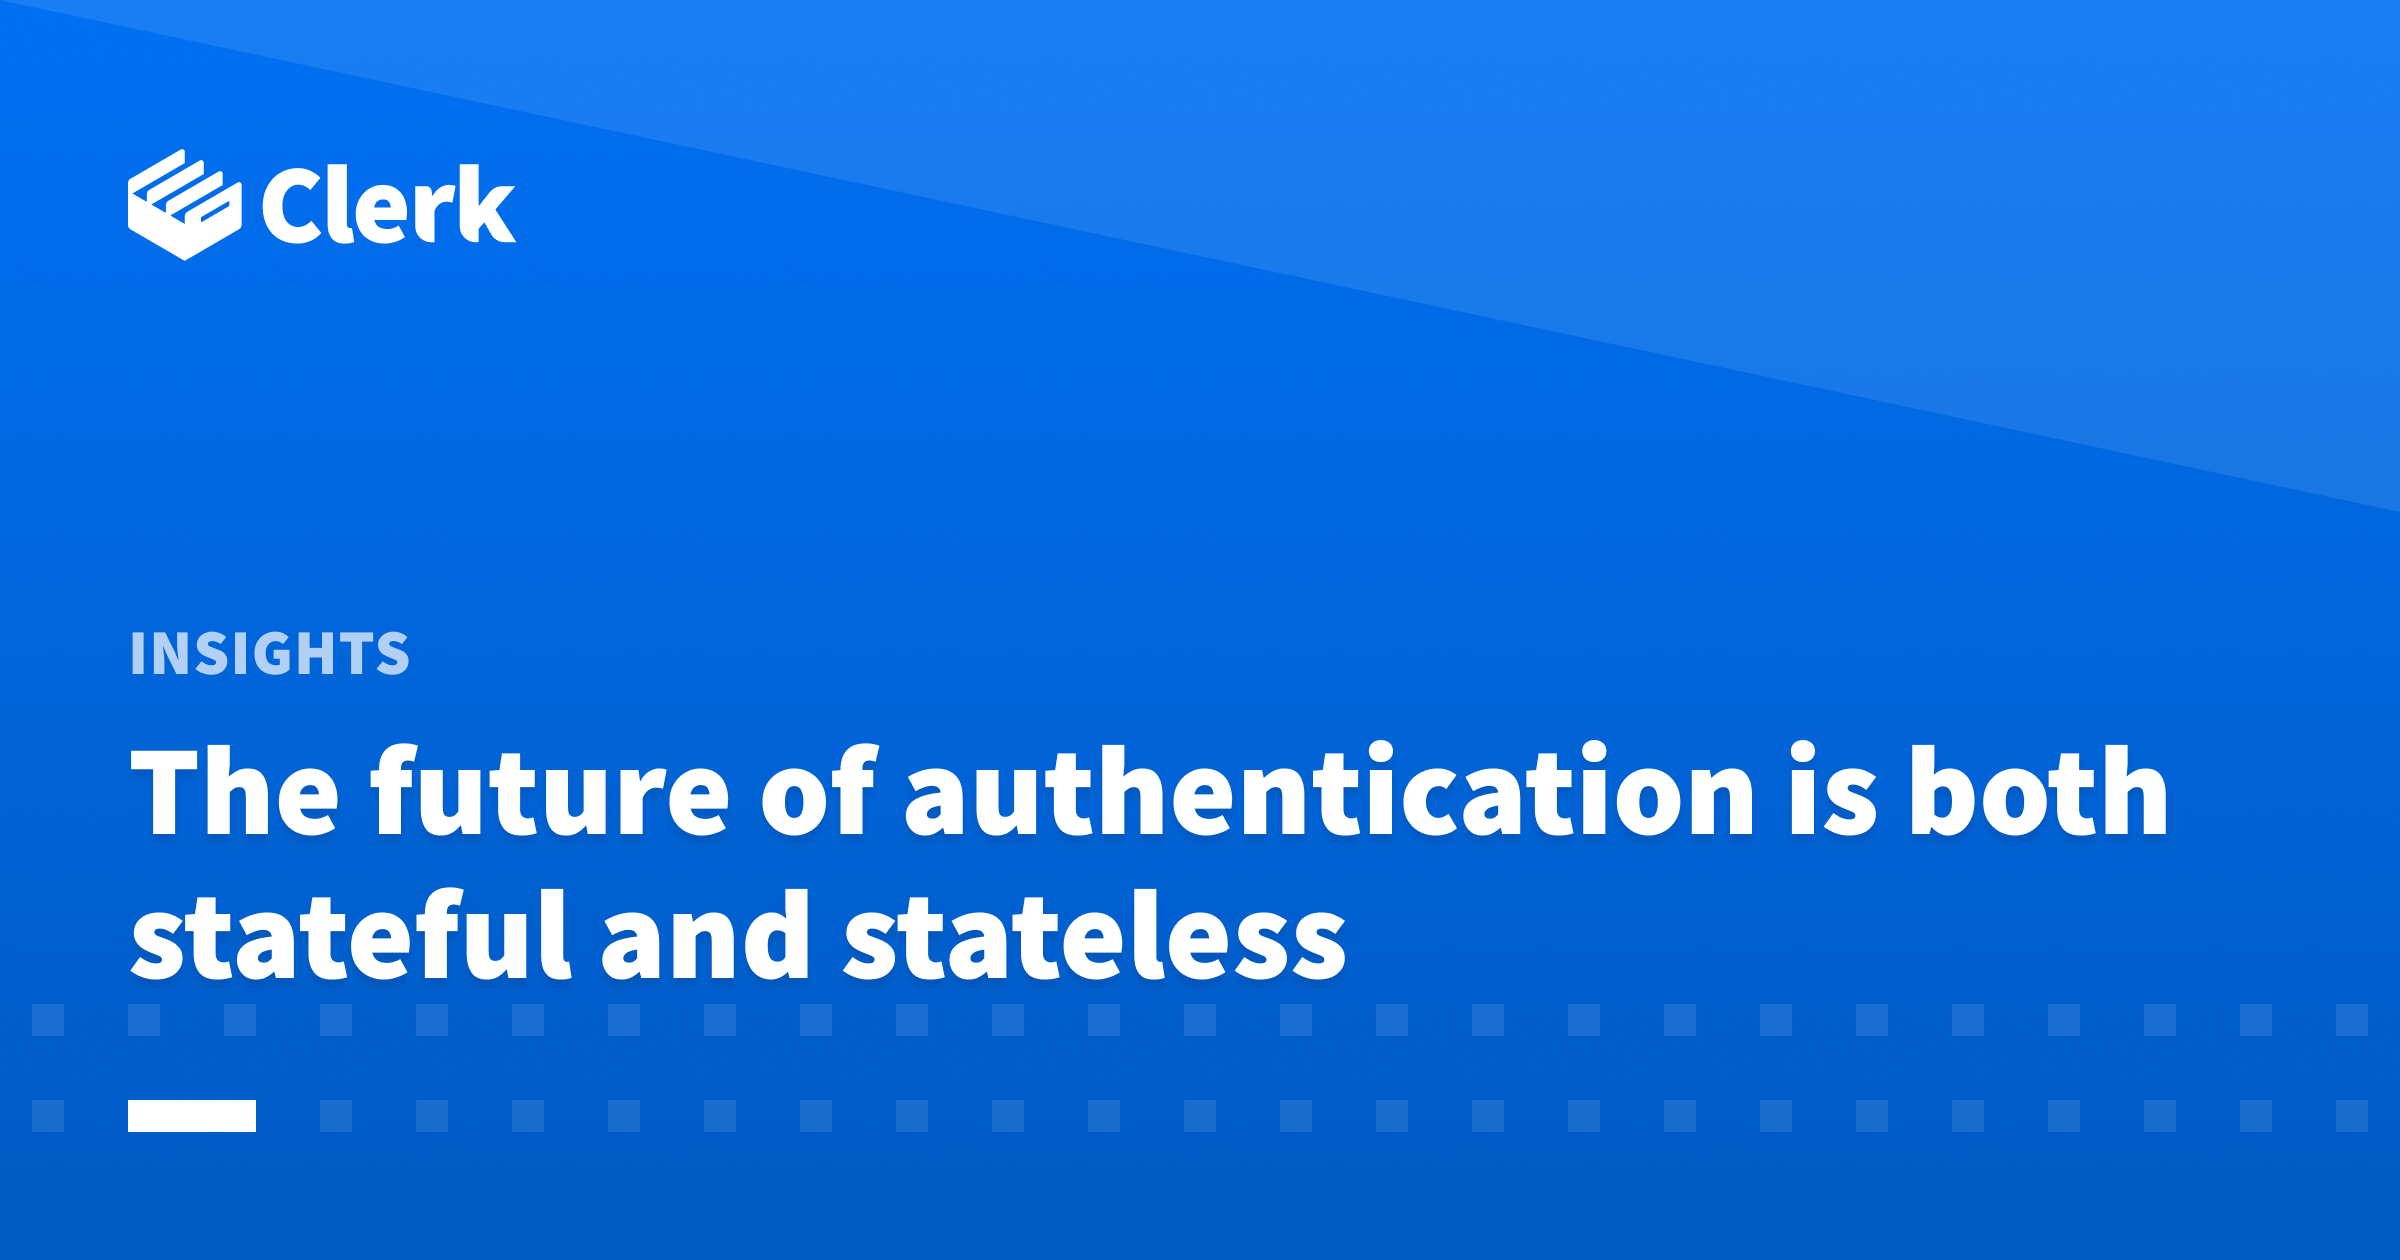 The future of authentication is both stateful and stateless